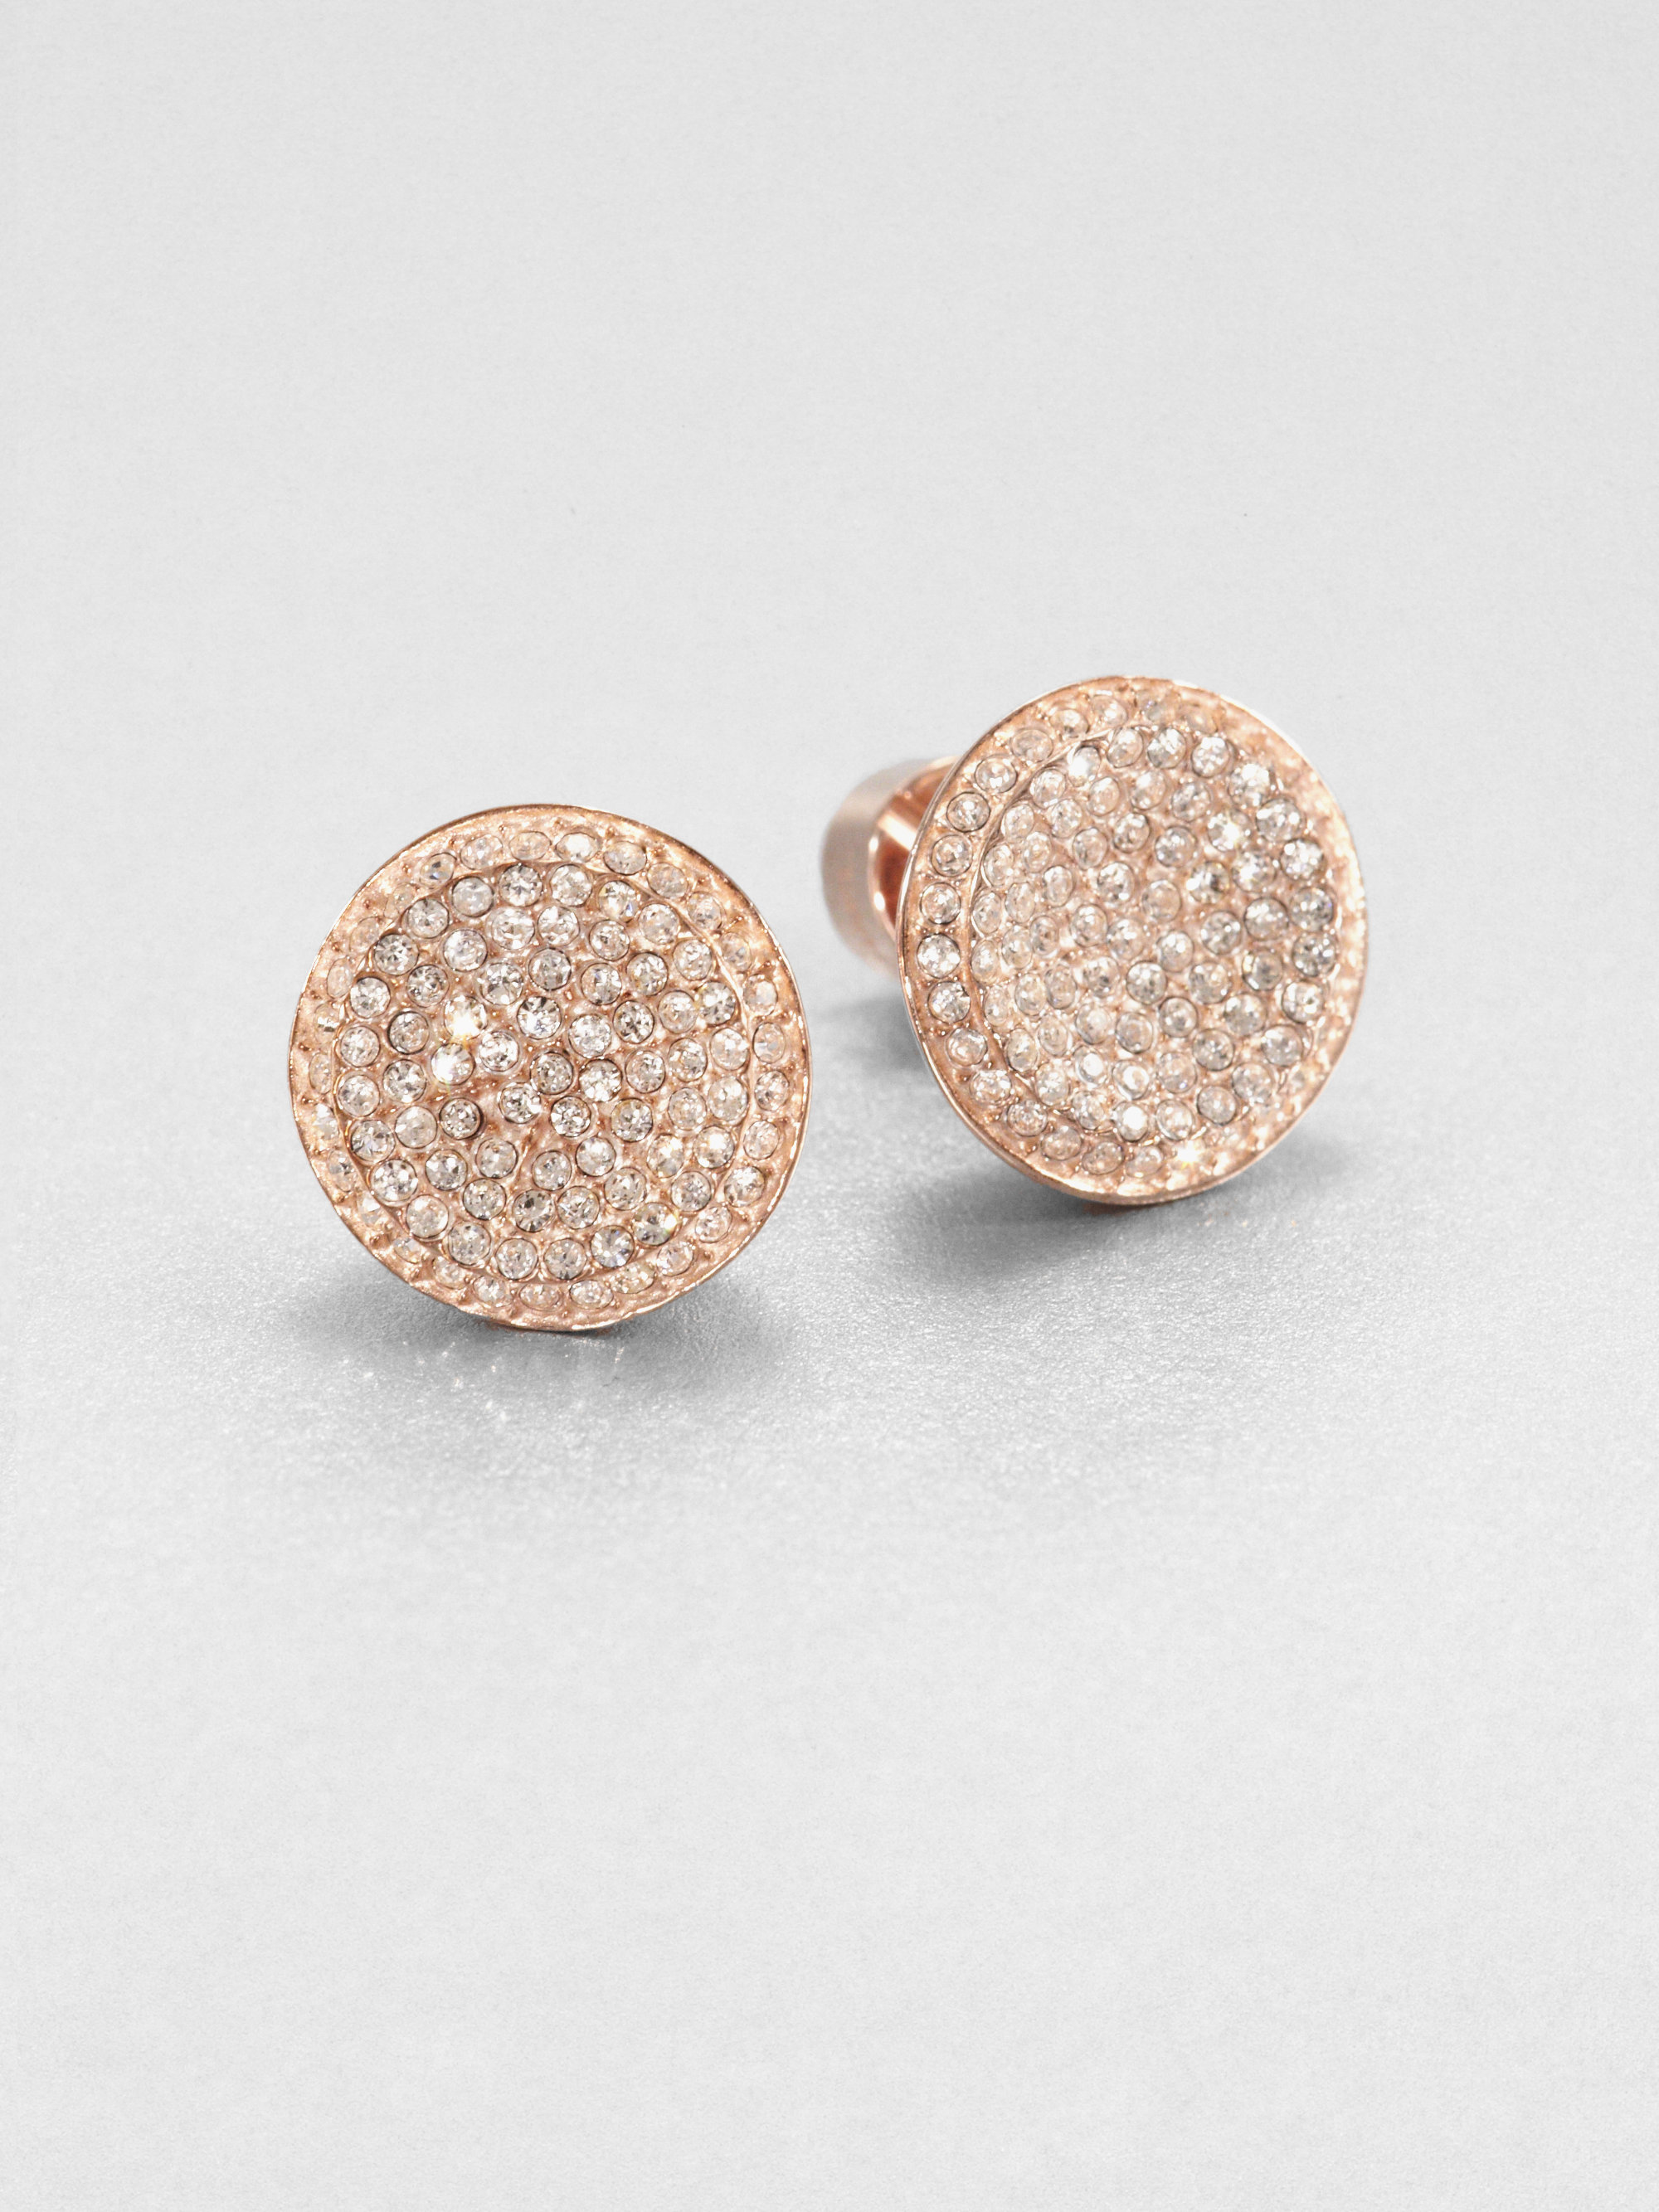 Michael Kors Concave Sparkle Stud Earrings in Rose Gold (Pink) - Lyst